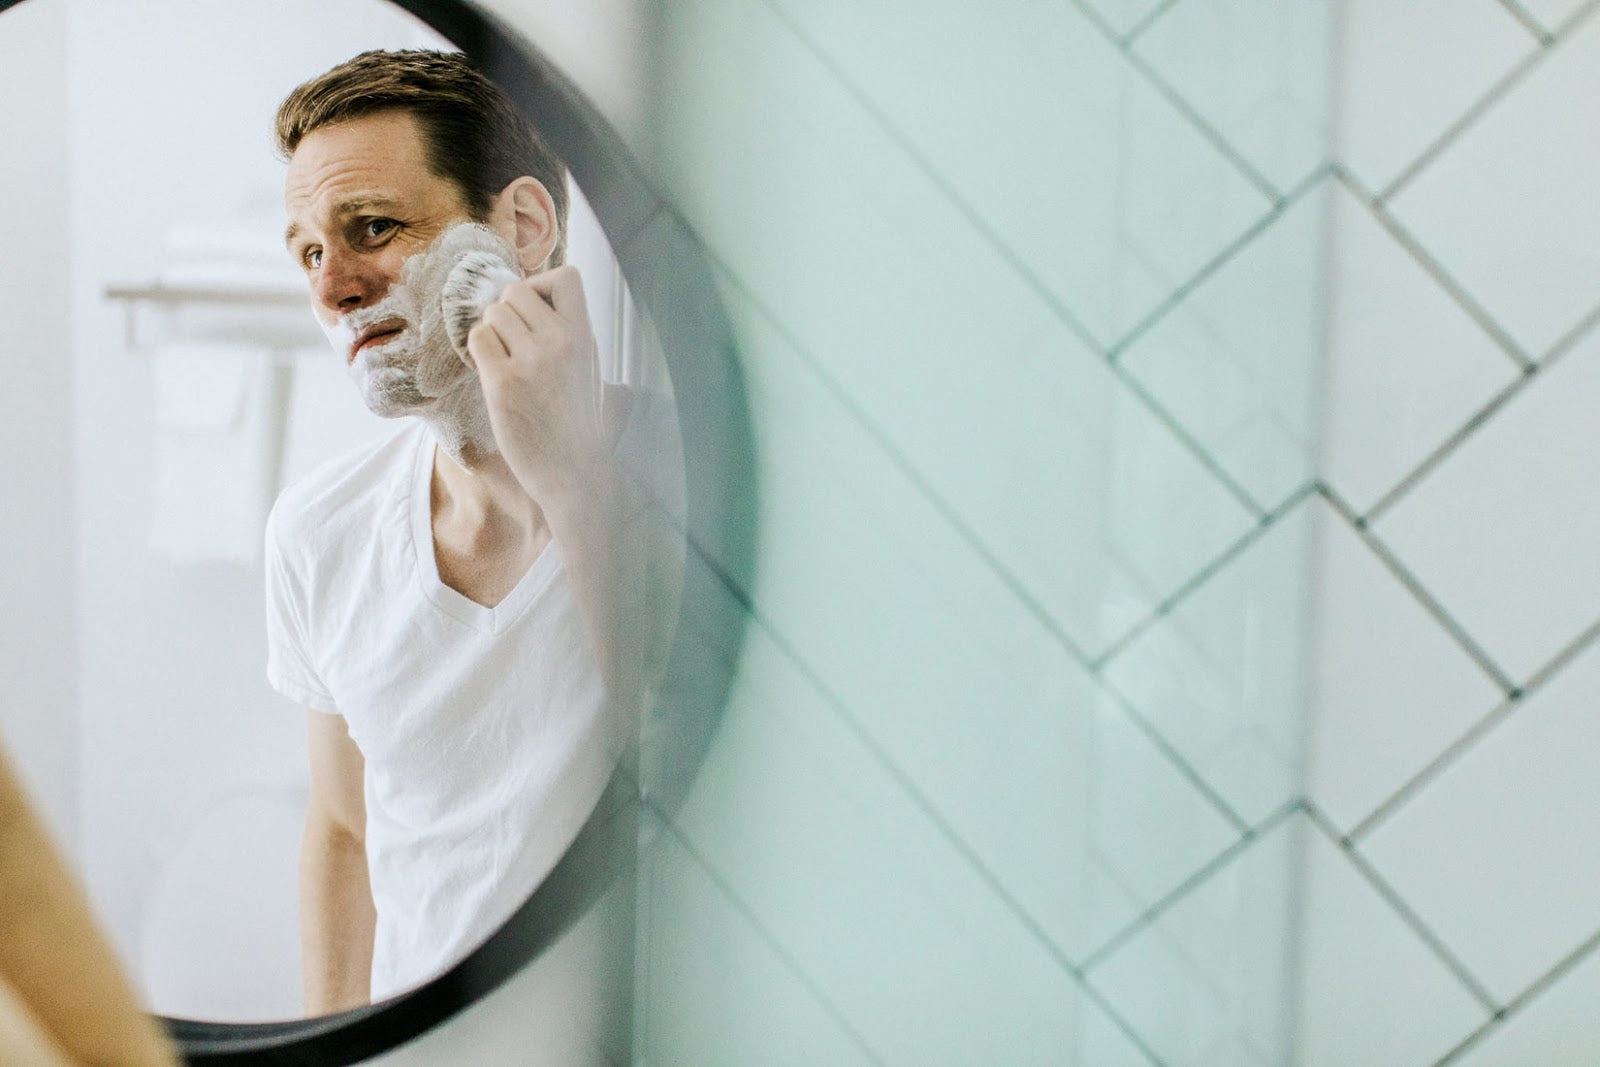 What Does Shaving Cream Do? And Why Is It Important?